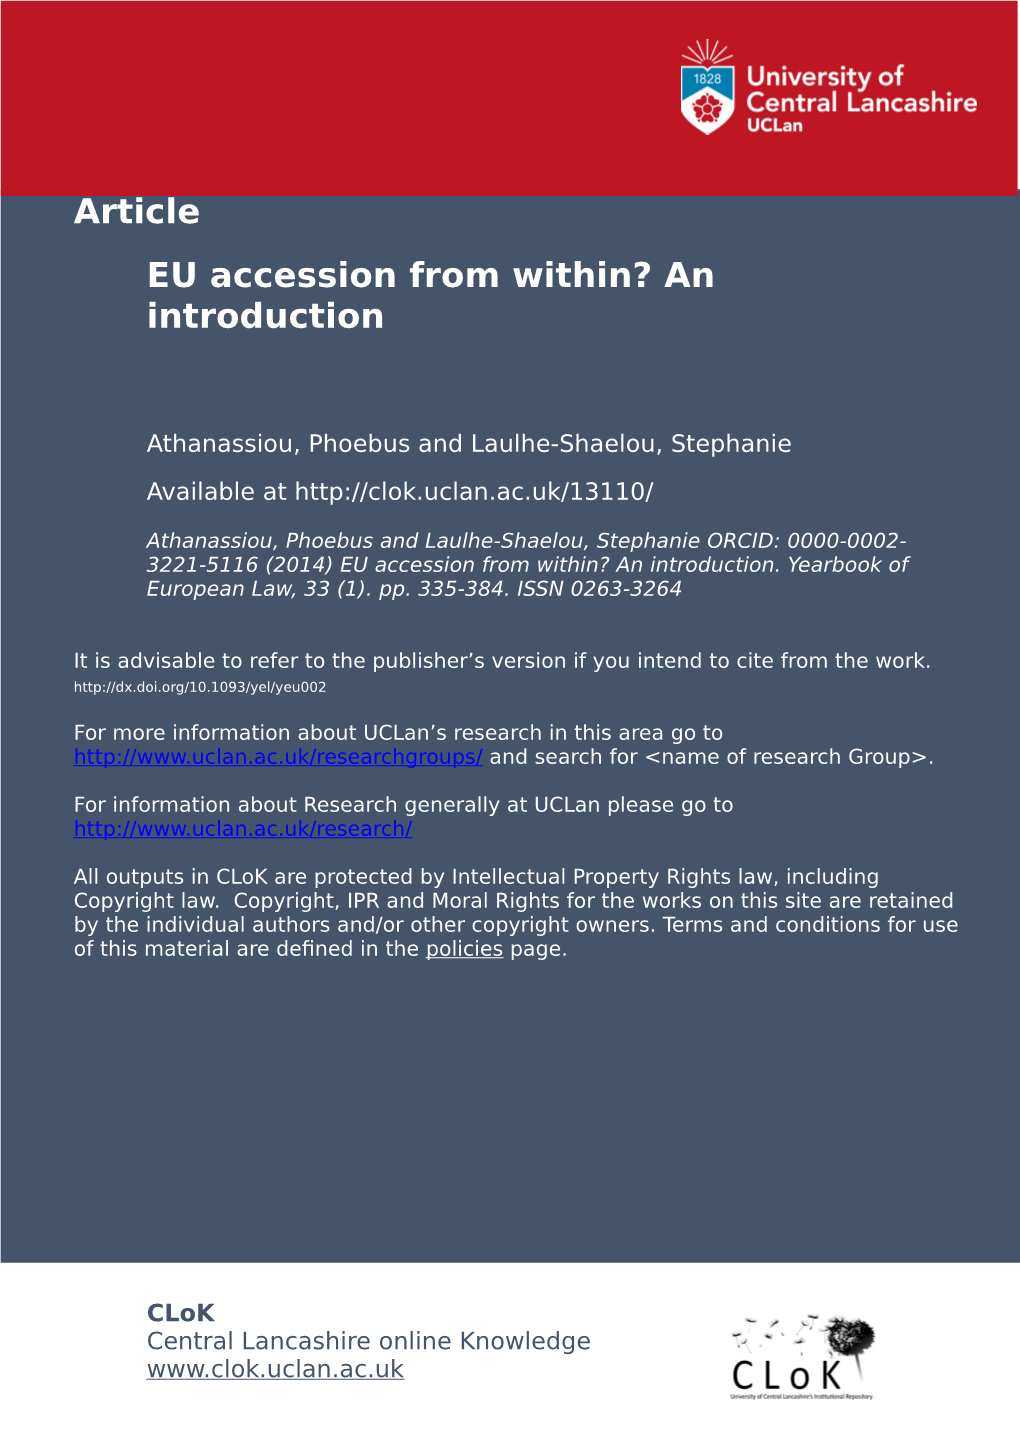 EU Accession from Within? an Introduction